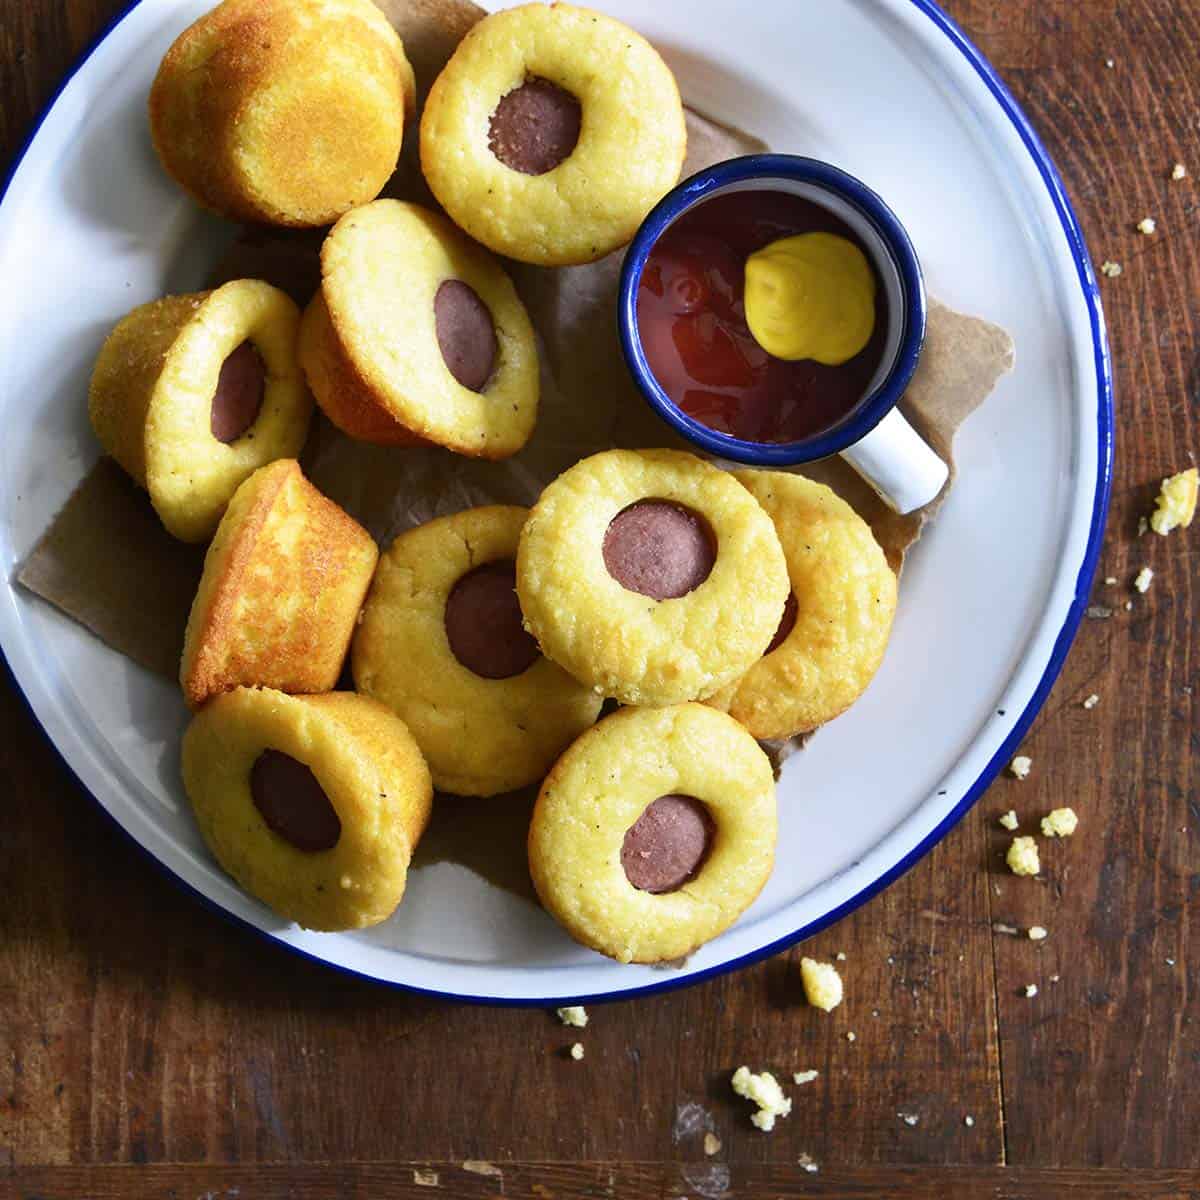 A top down view of low carb corn dog bites on a white and blue plate with a dish containing mustard and ketchup.